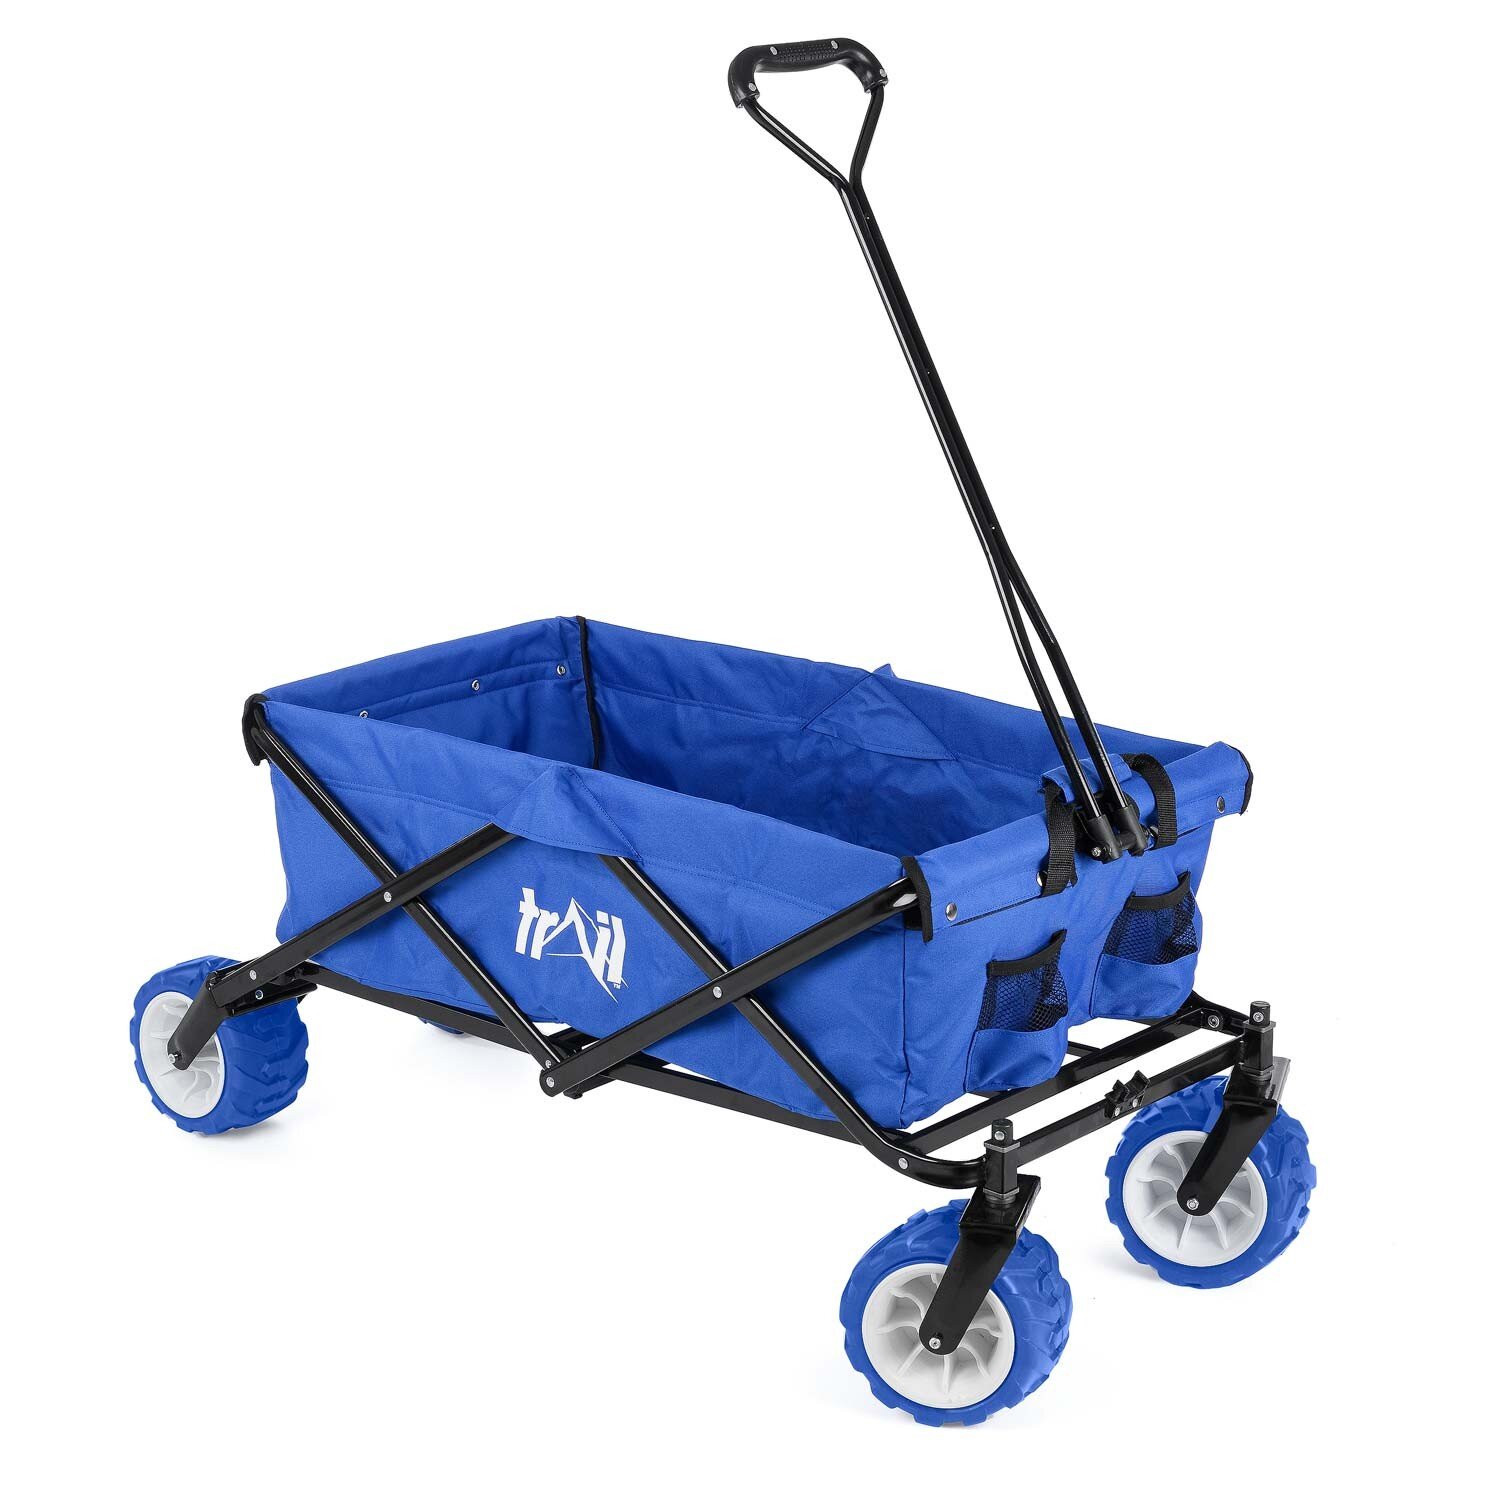 Collapsible Portable Camping Wagon Trolley Folding Wheeled Festival Carry Cart